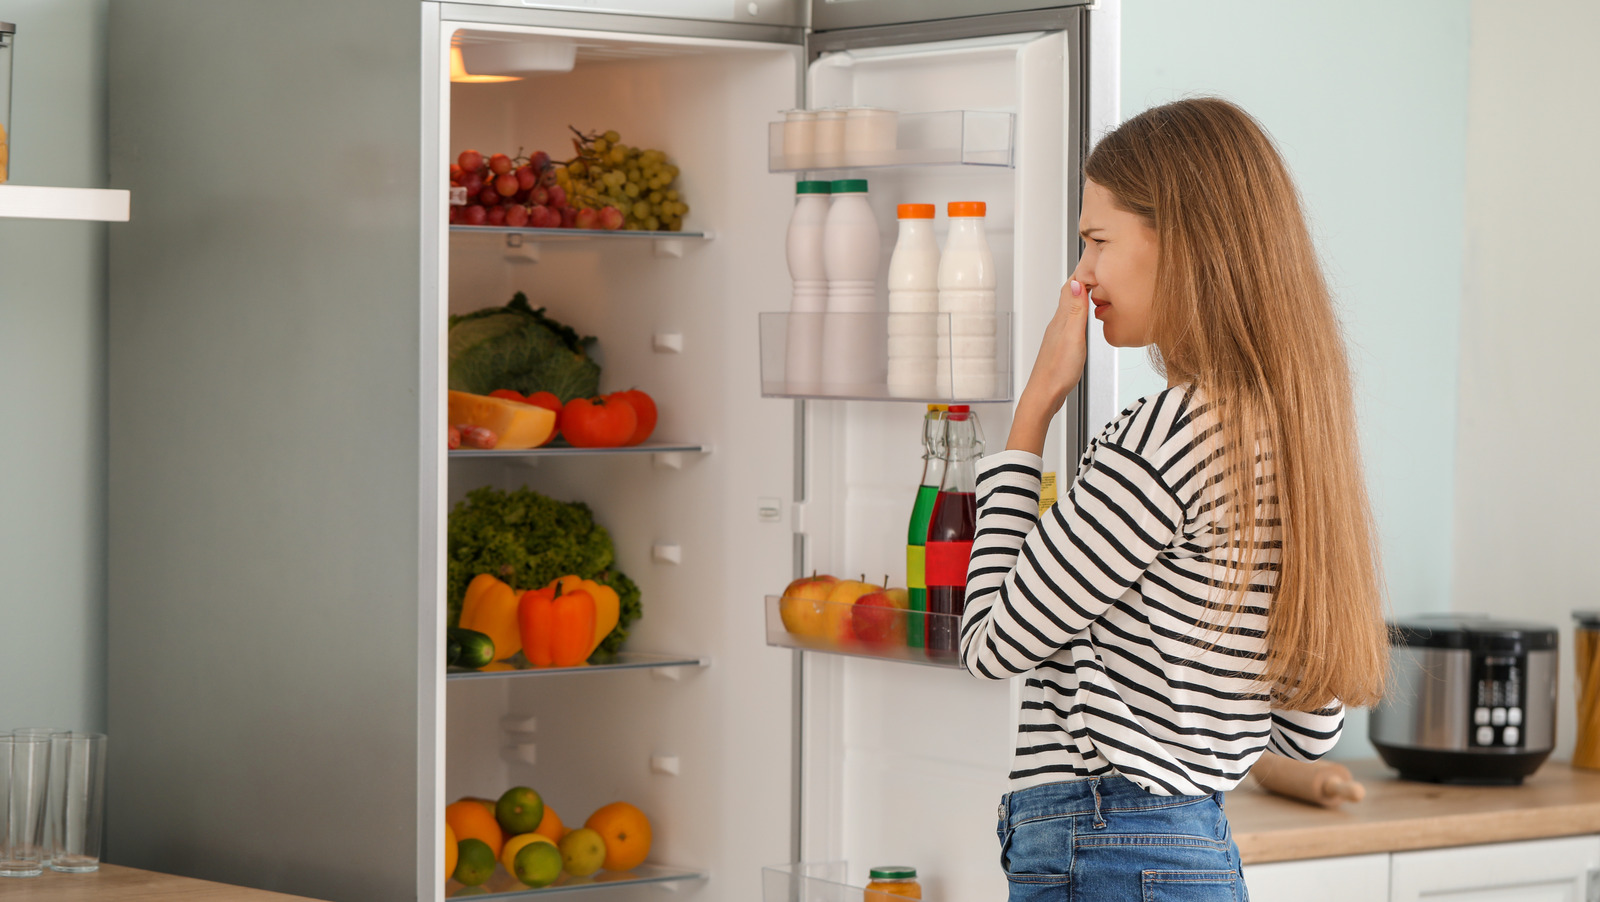 The 12 best ways to get rid of unpleasant odors in your refrigerator